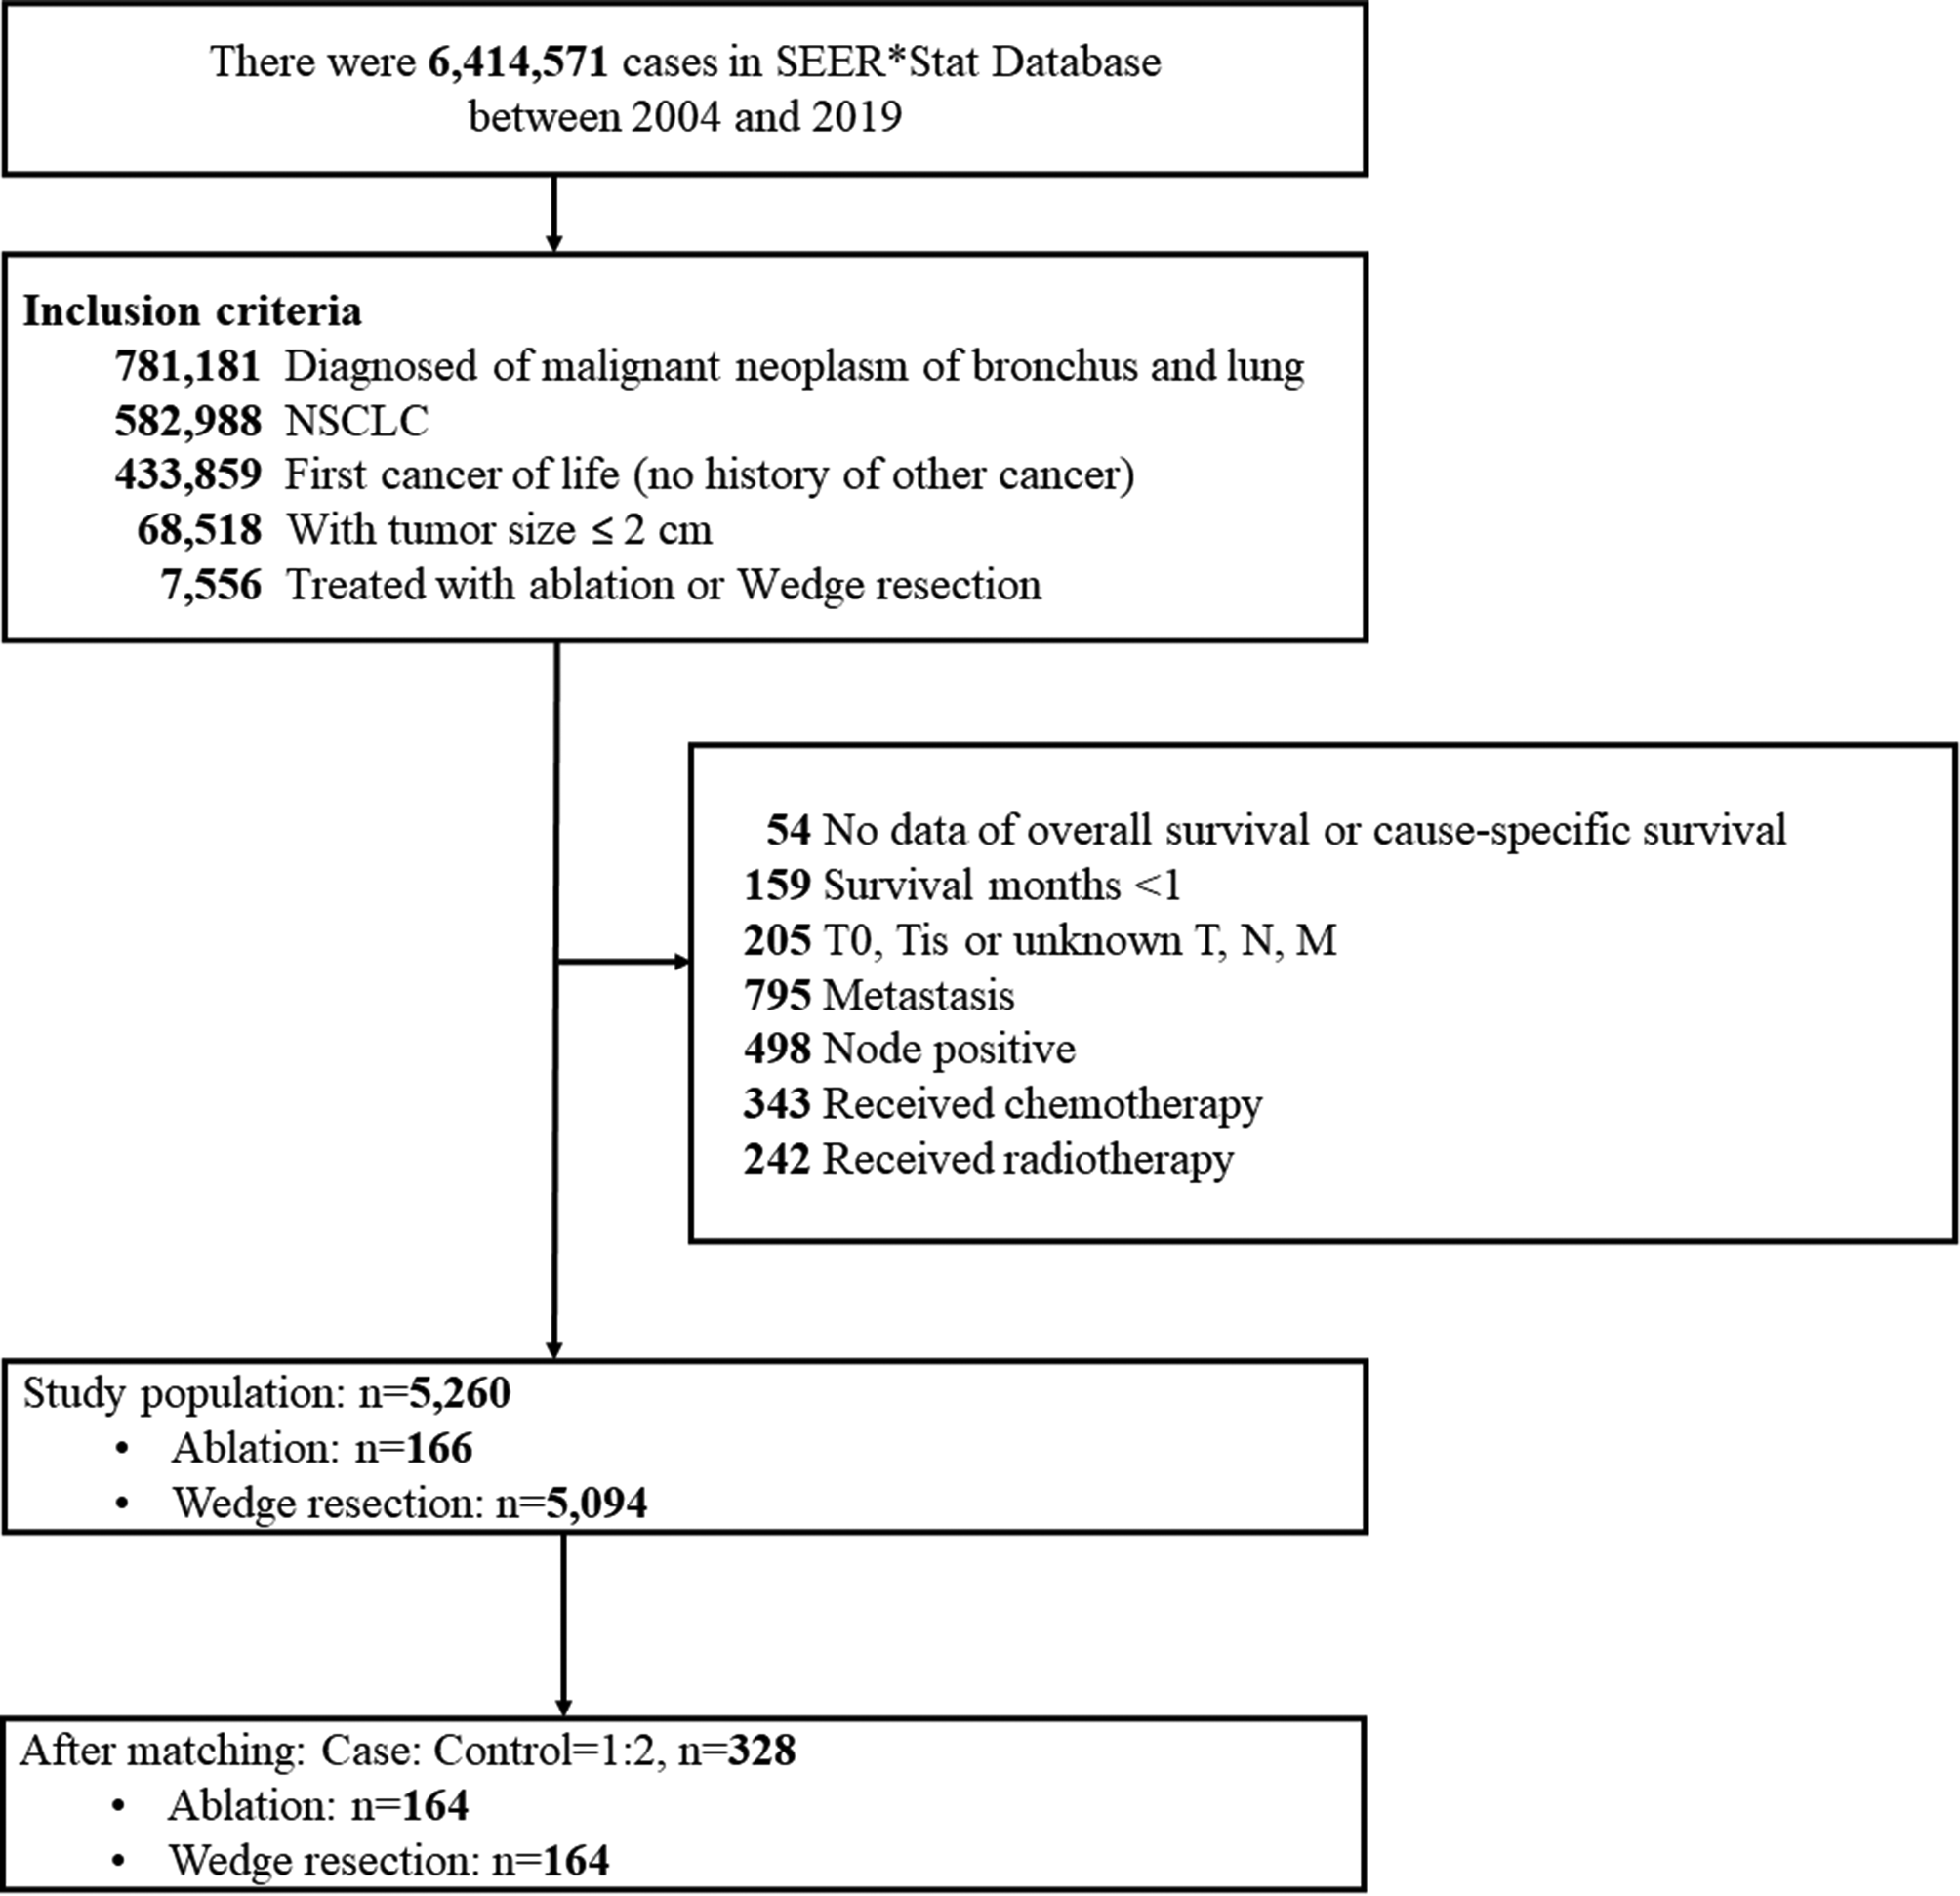 Survival after thermal ablation versus wedge resection for stage I non-small cell lung cancer < 1 cm and 1 to 2 cm: evidence from the US SEER database